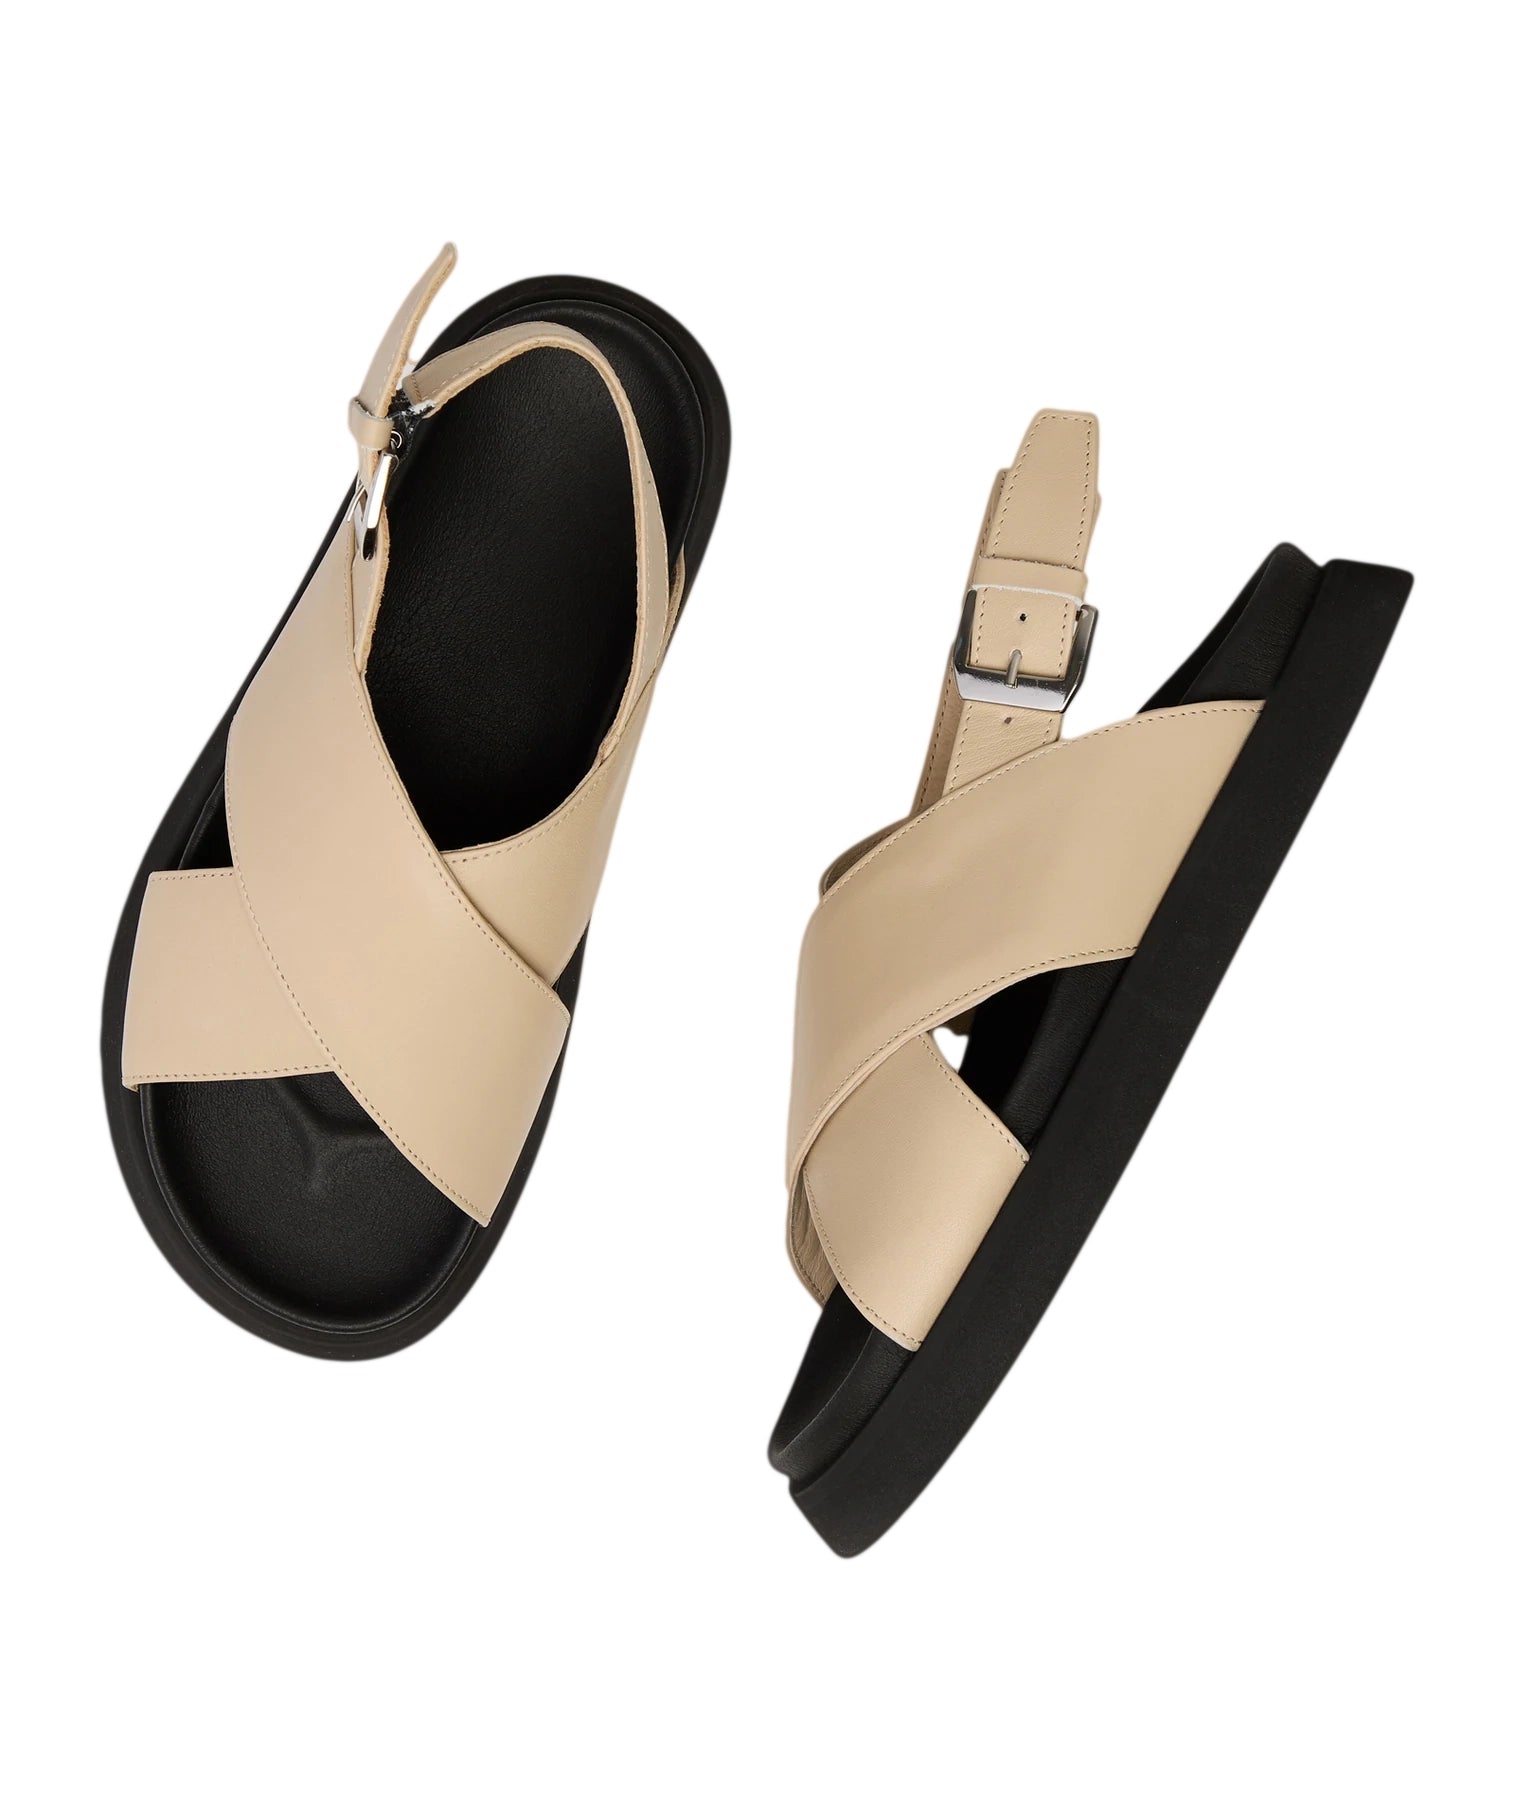 Yodi Sandals, off white leather